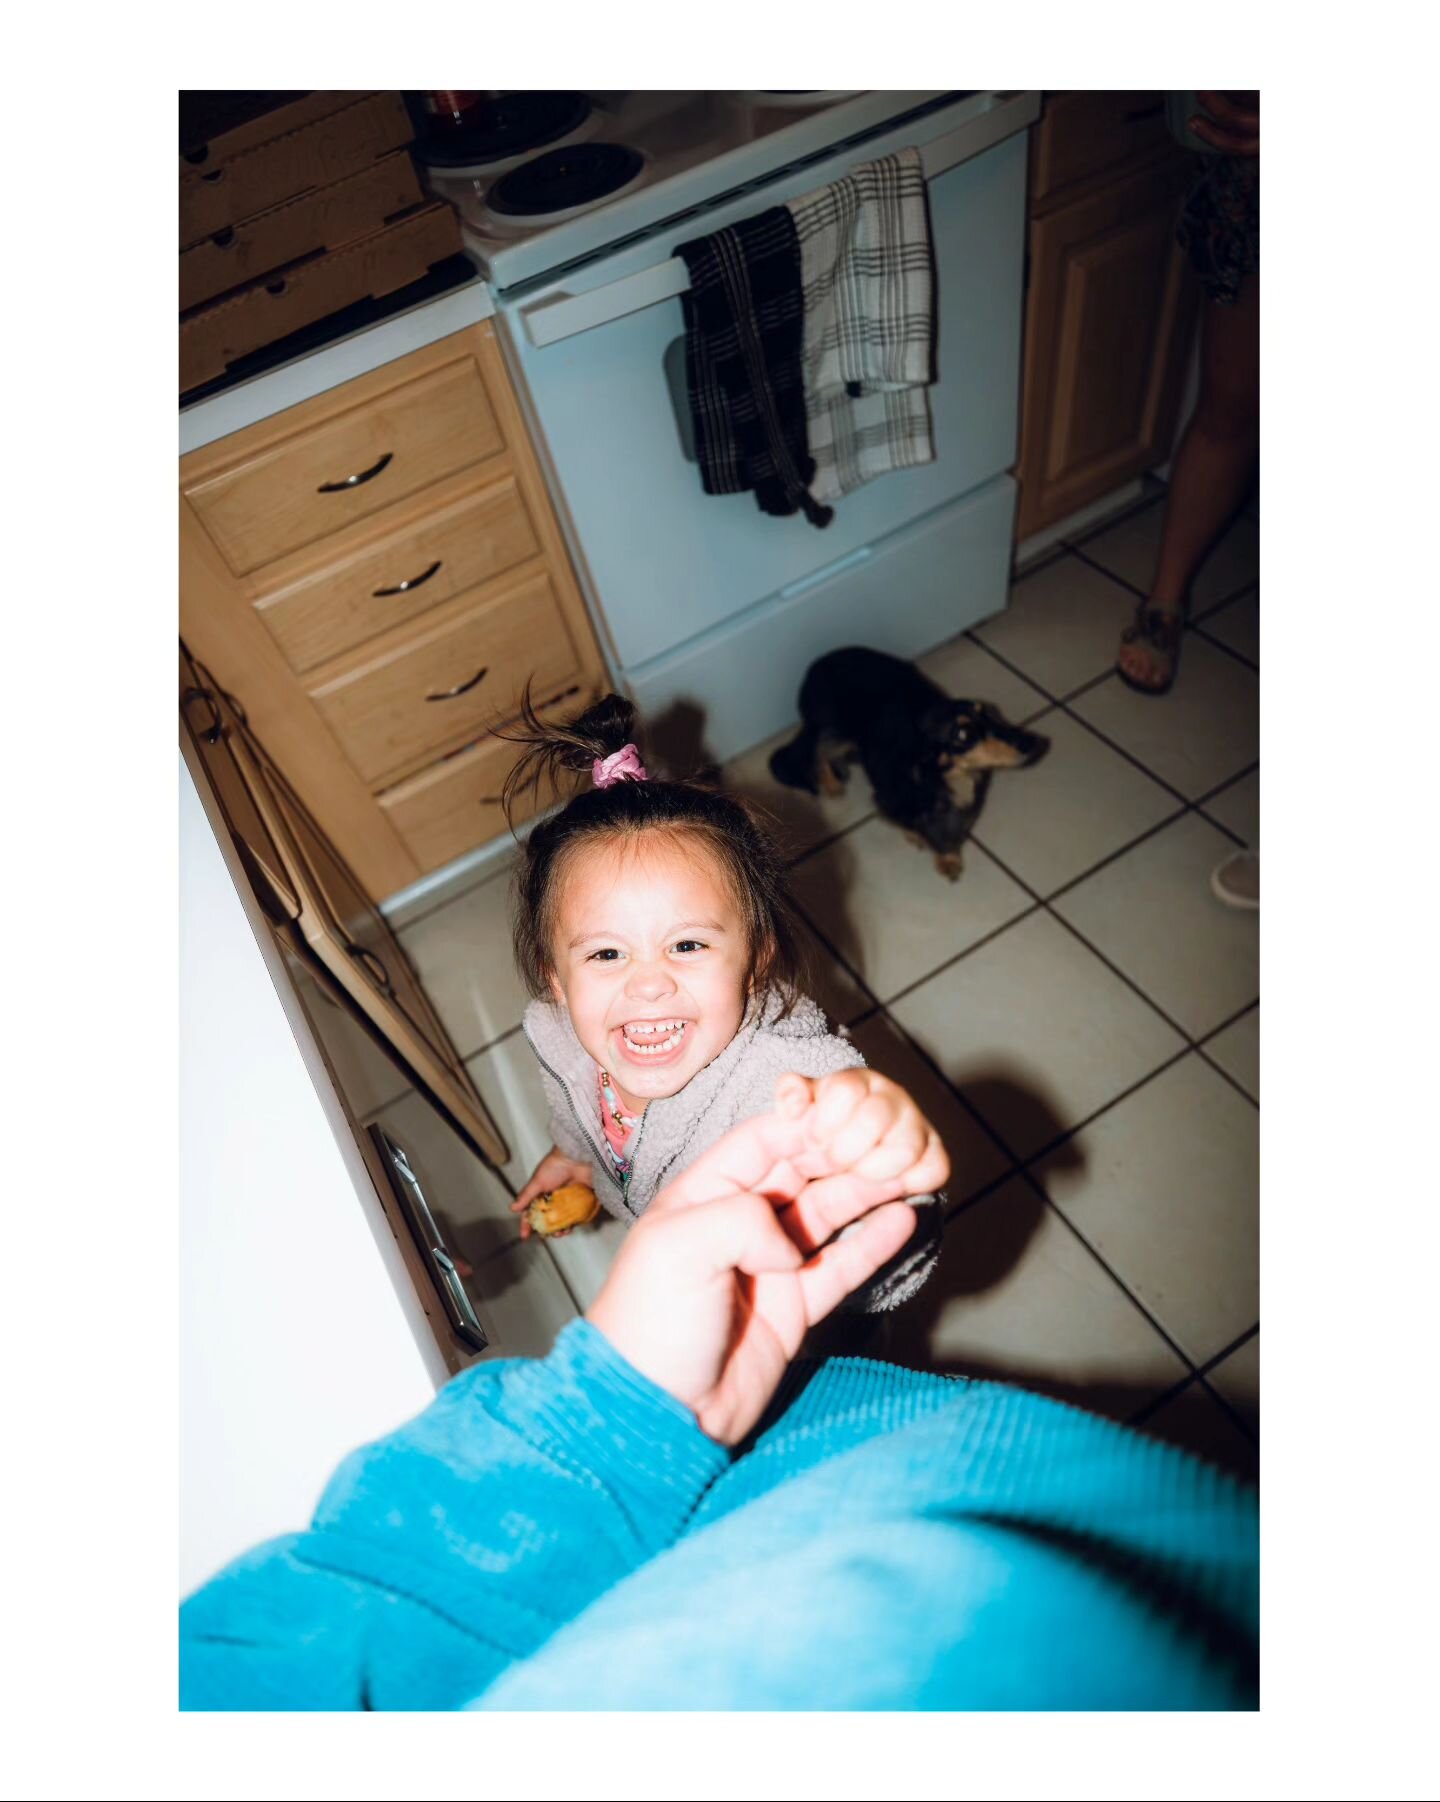 May has been good to me. Turned 29 this month.

'Bout time I start refocusing my energy.

1- My nieces awesome smile!
2- Congrats Liz! 🥳
3- Toughest kitchen crew in New Haven
4- Sky made fun of me for taking photos of everything and told me to take 